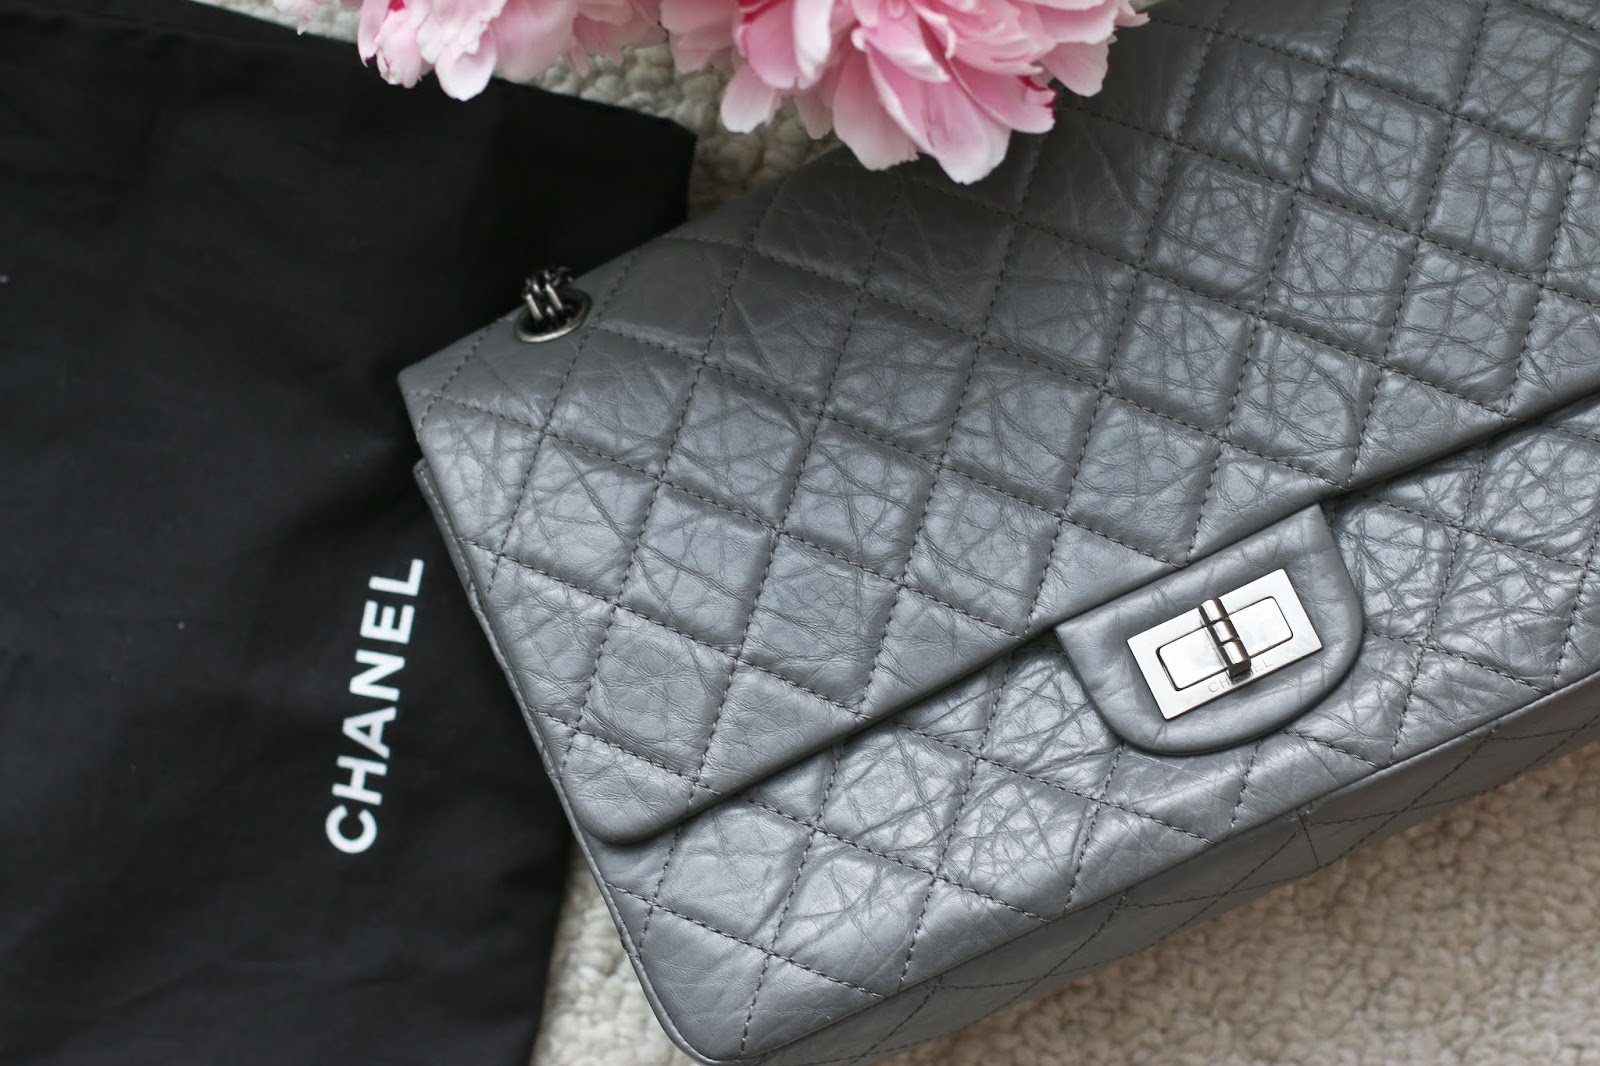 The REAL Story Behind The Chanel 2.55 Flap Bag